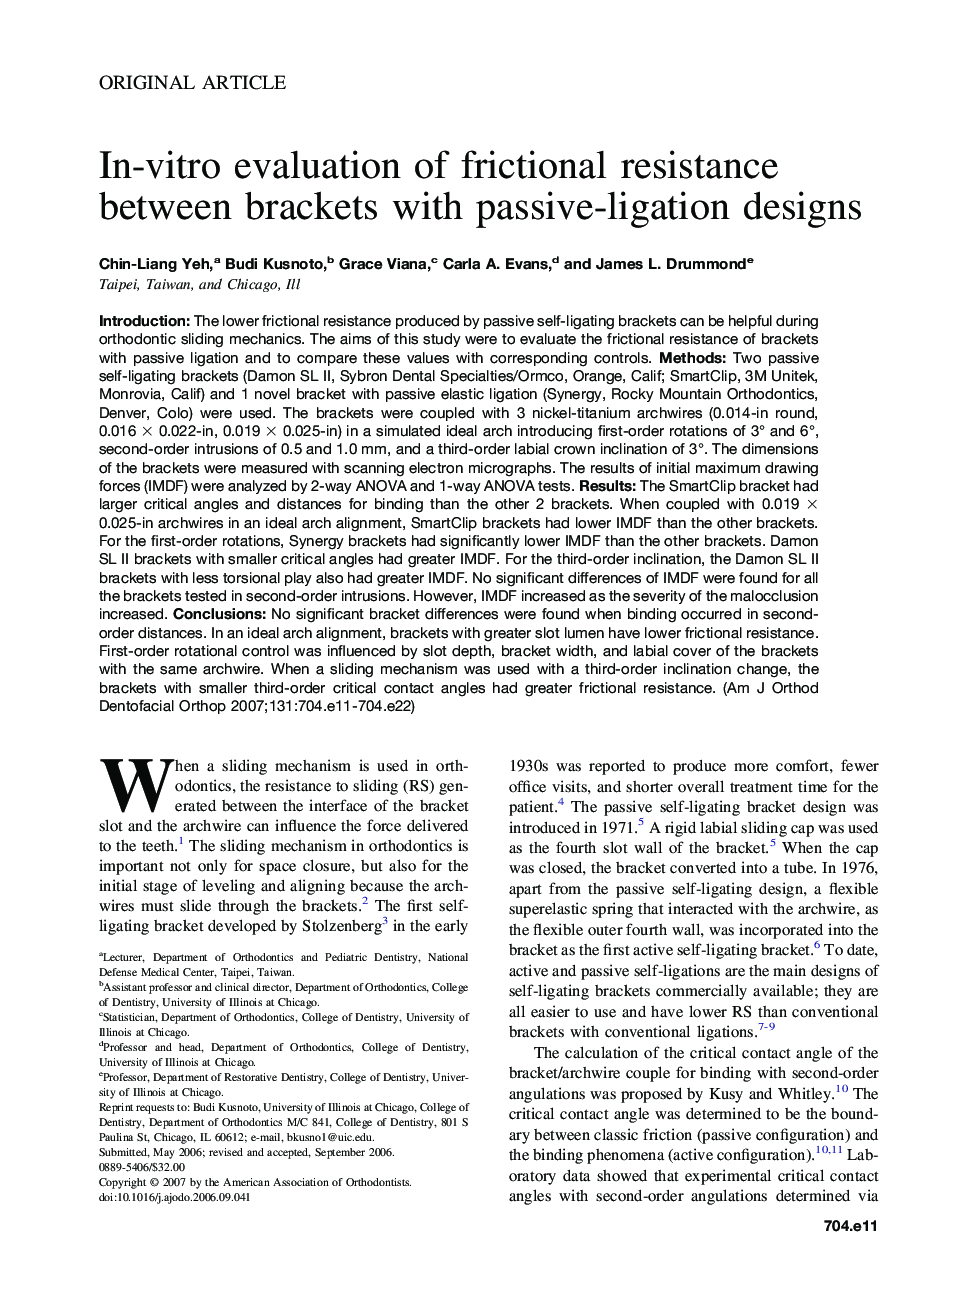 In-vitro evaluation of frictional resistance between brackets with passive-ligation designs